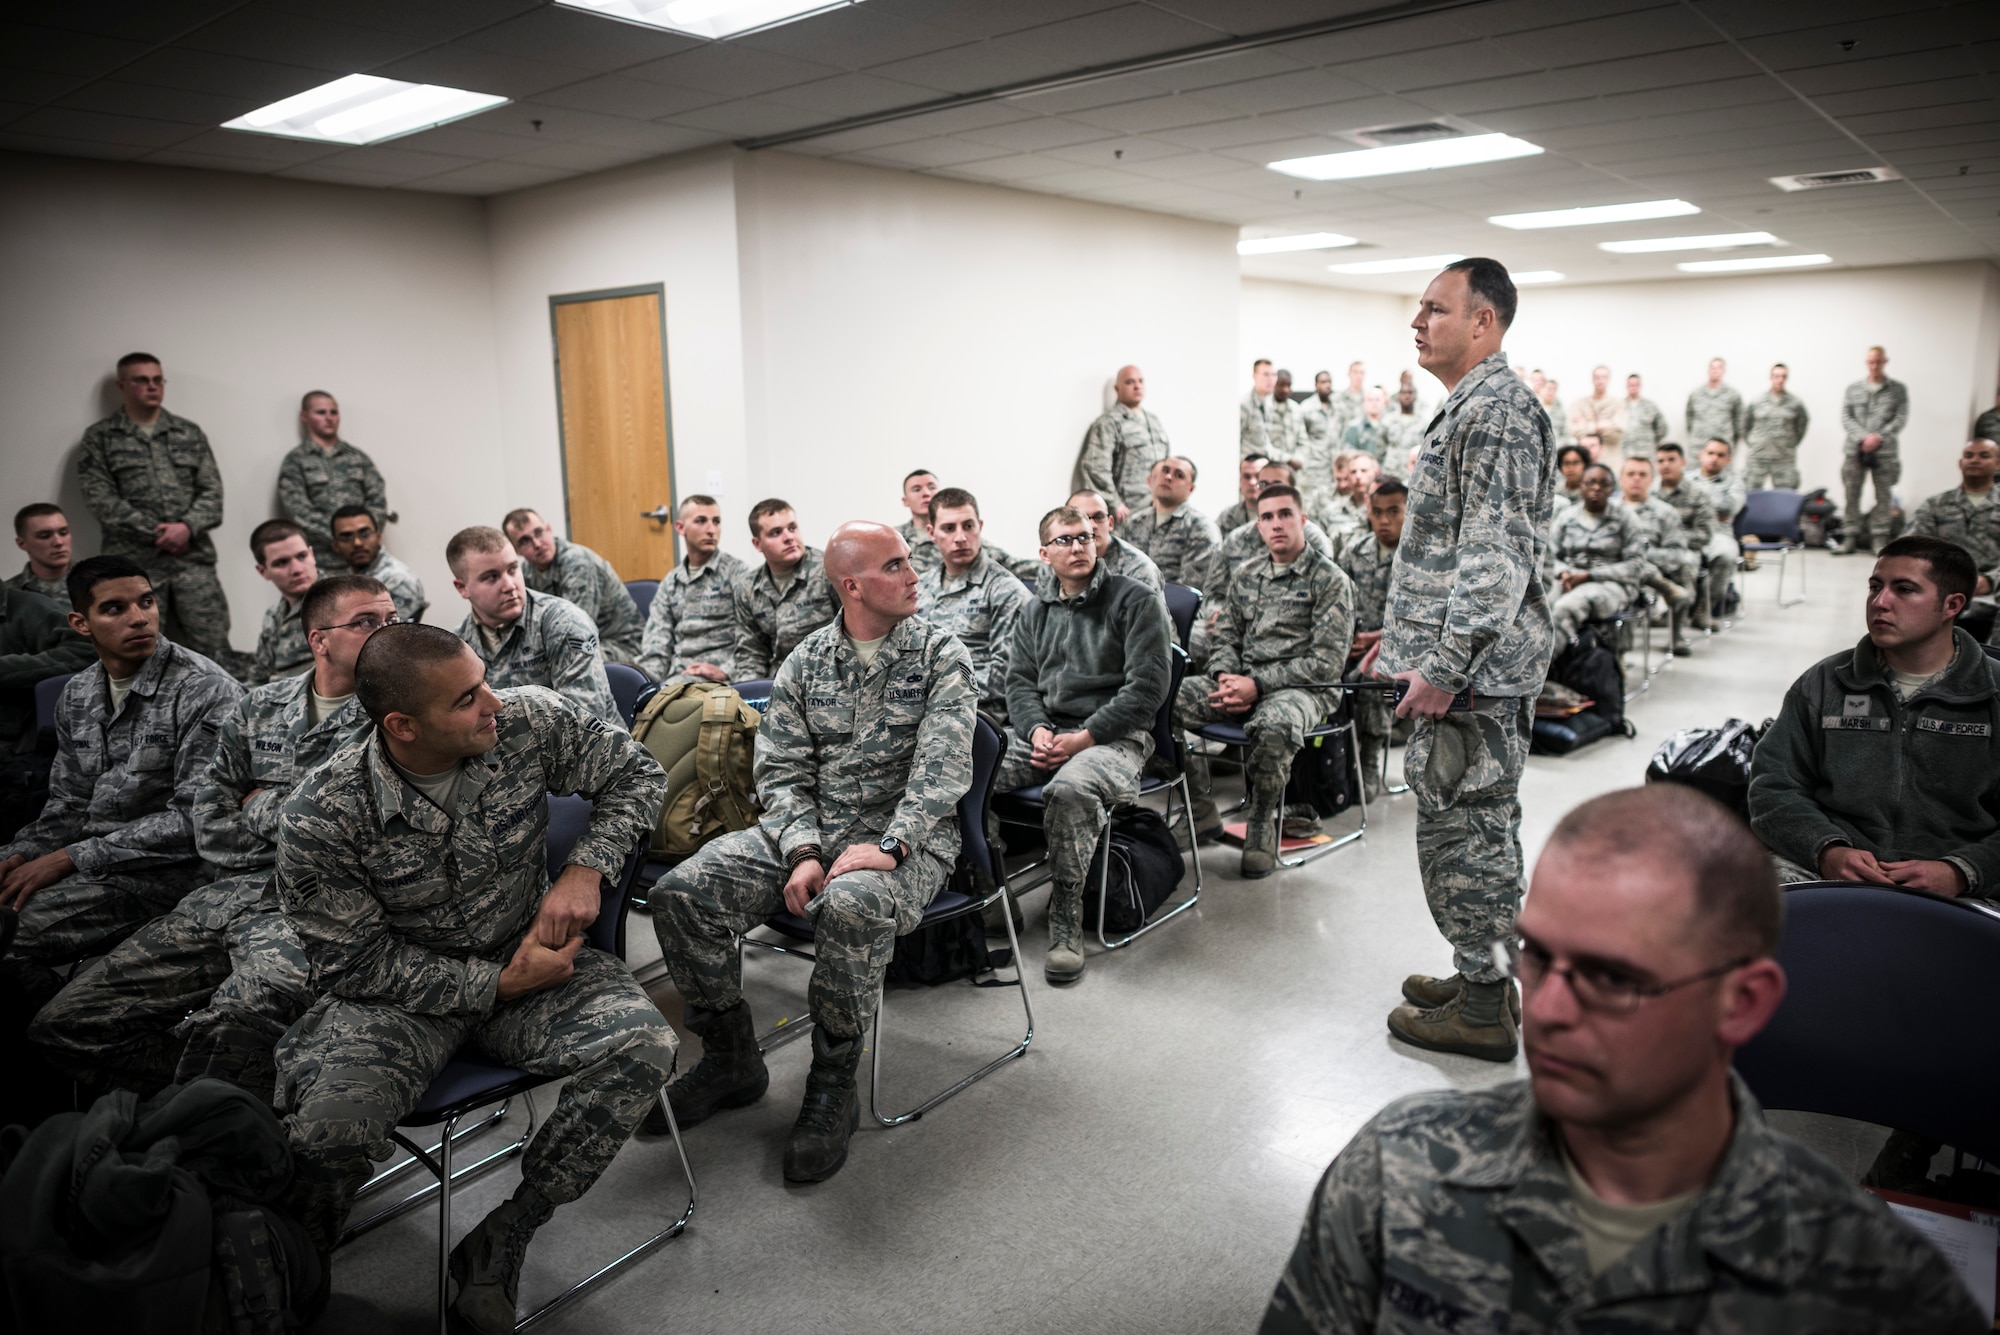 U.S. Air Force Col. Chris Short, 366th Fighter Wing commander, talks to Airmen about to deploy from Mountain Home Air Force Base, Idaho, April 23, 2013. Short talked about the importance of the Airmen's mission, and how much the Air Force values their contribution. (U.S. Air Force photo/Tech. Sgt. Samuel Morse)